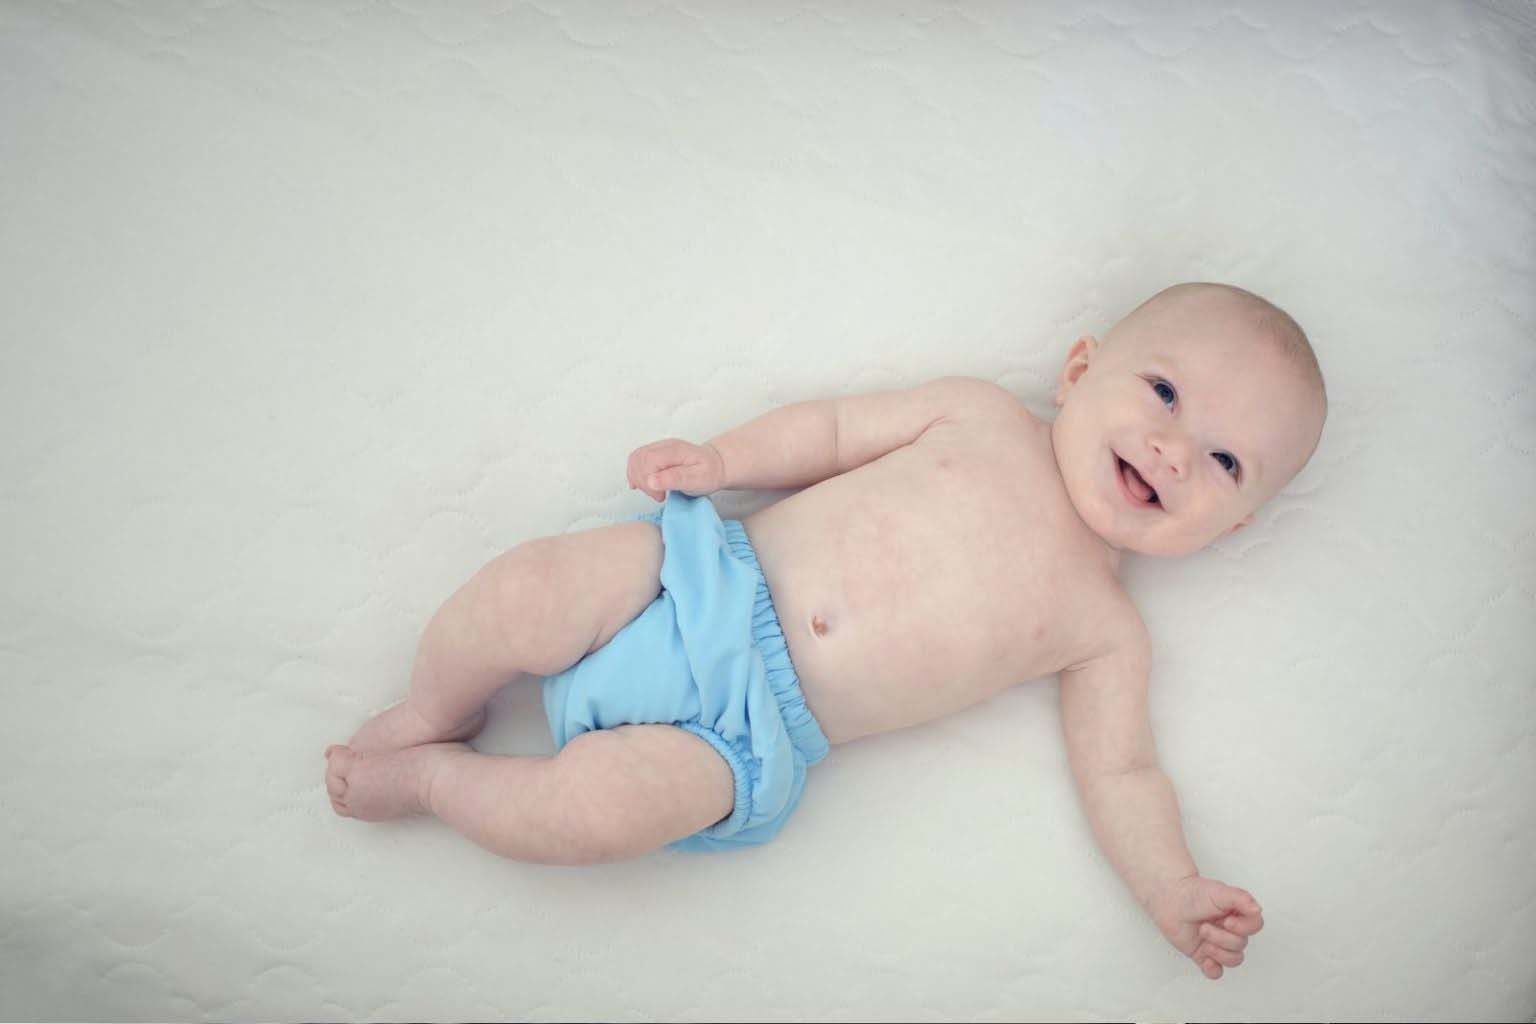 cloth-diapering pros and cons